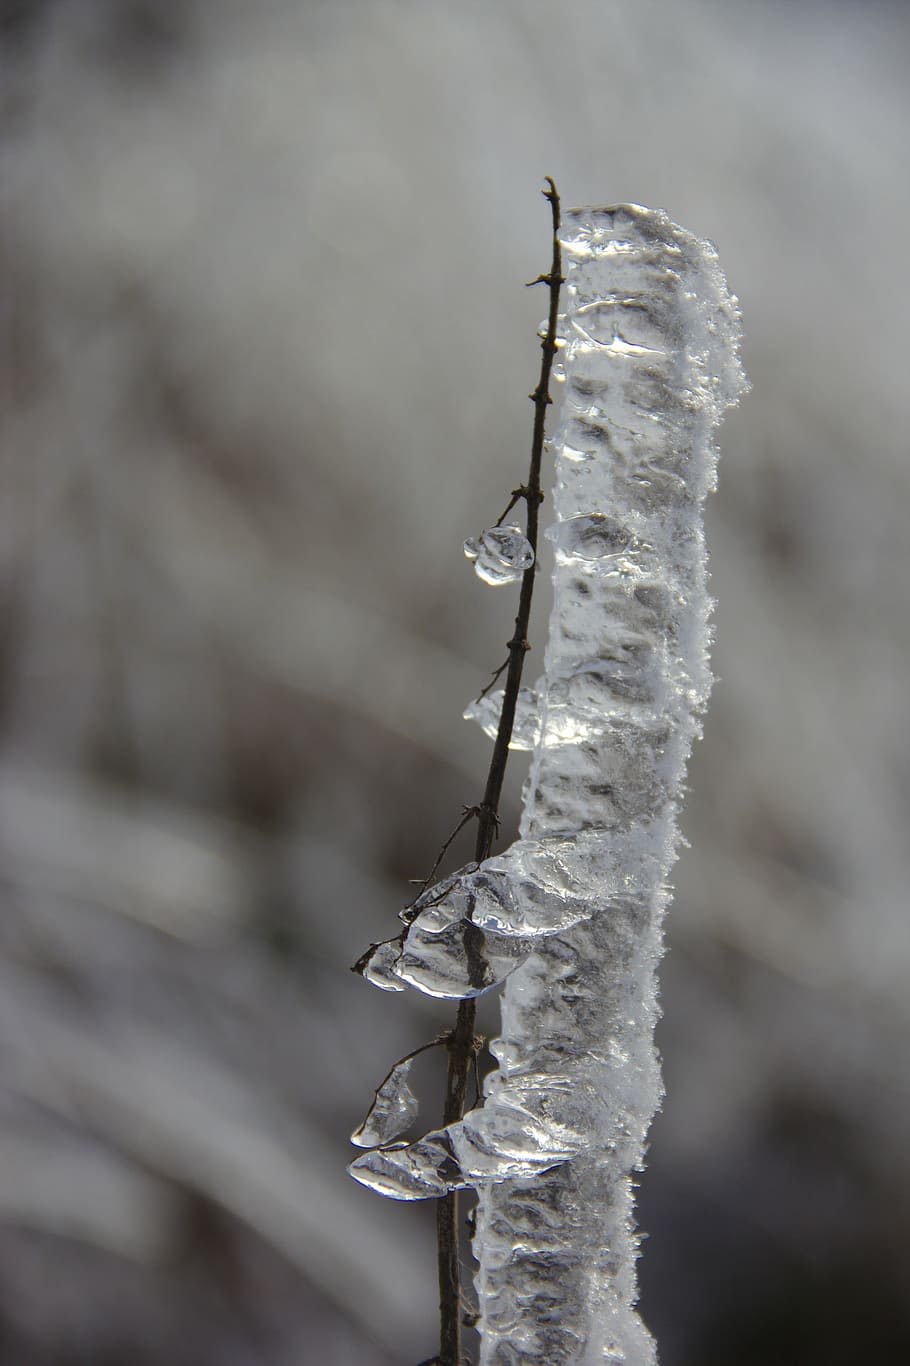  Eis Hintergrundbild 910x1366. 1280x720px. free download. HD wallpaper: eisraupe, ice on the branch, iced, aesthetic, branches, iced ast